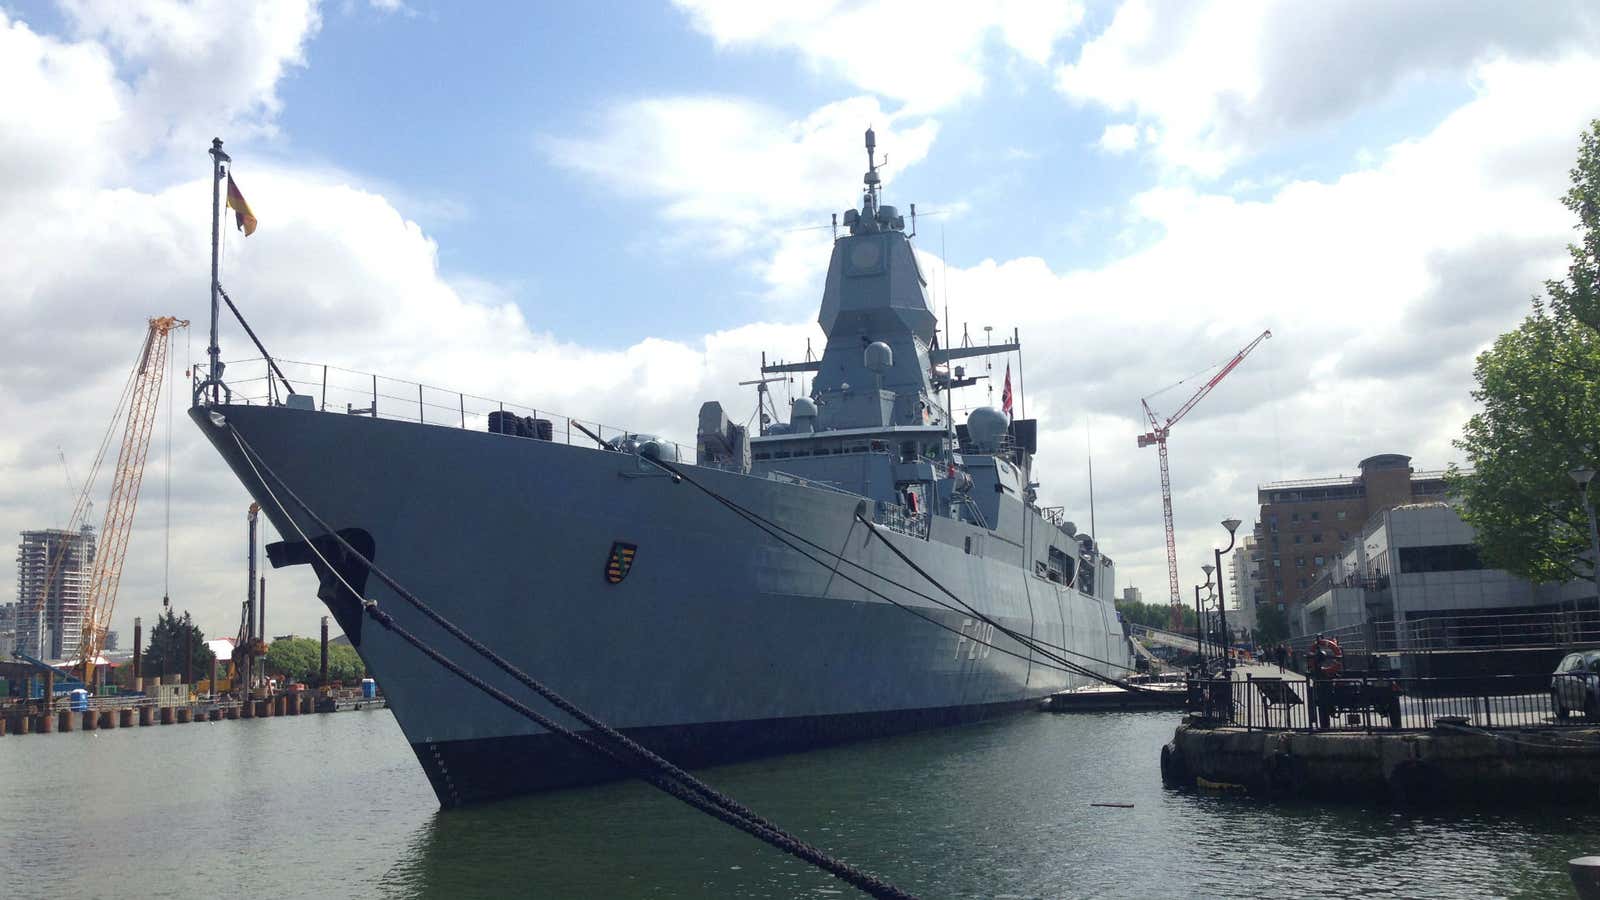 The Sachsen class frigate F129, also called Sachsen, berthed in London’s Canary Wharf district.